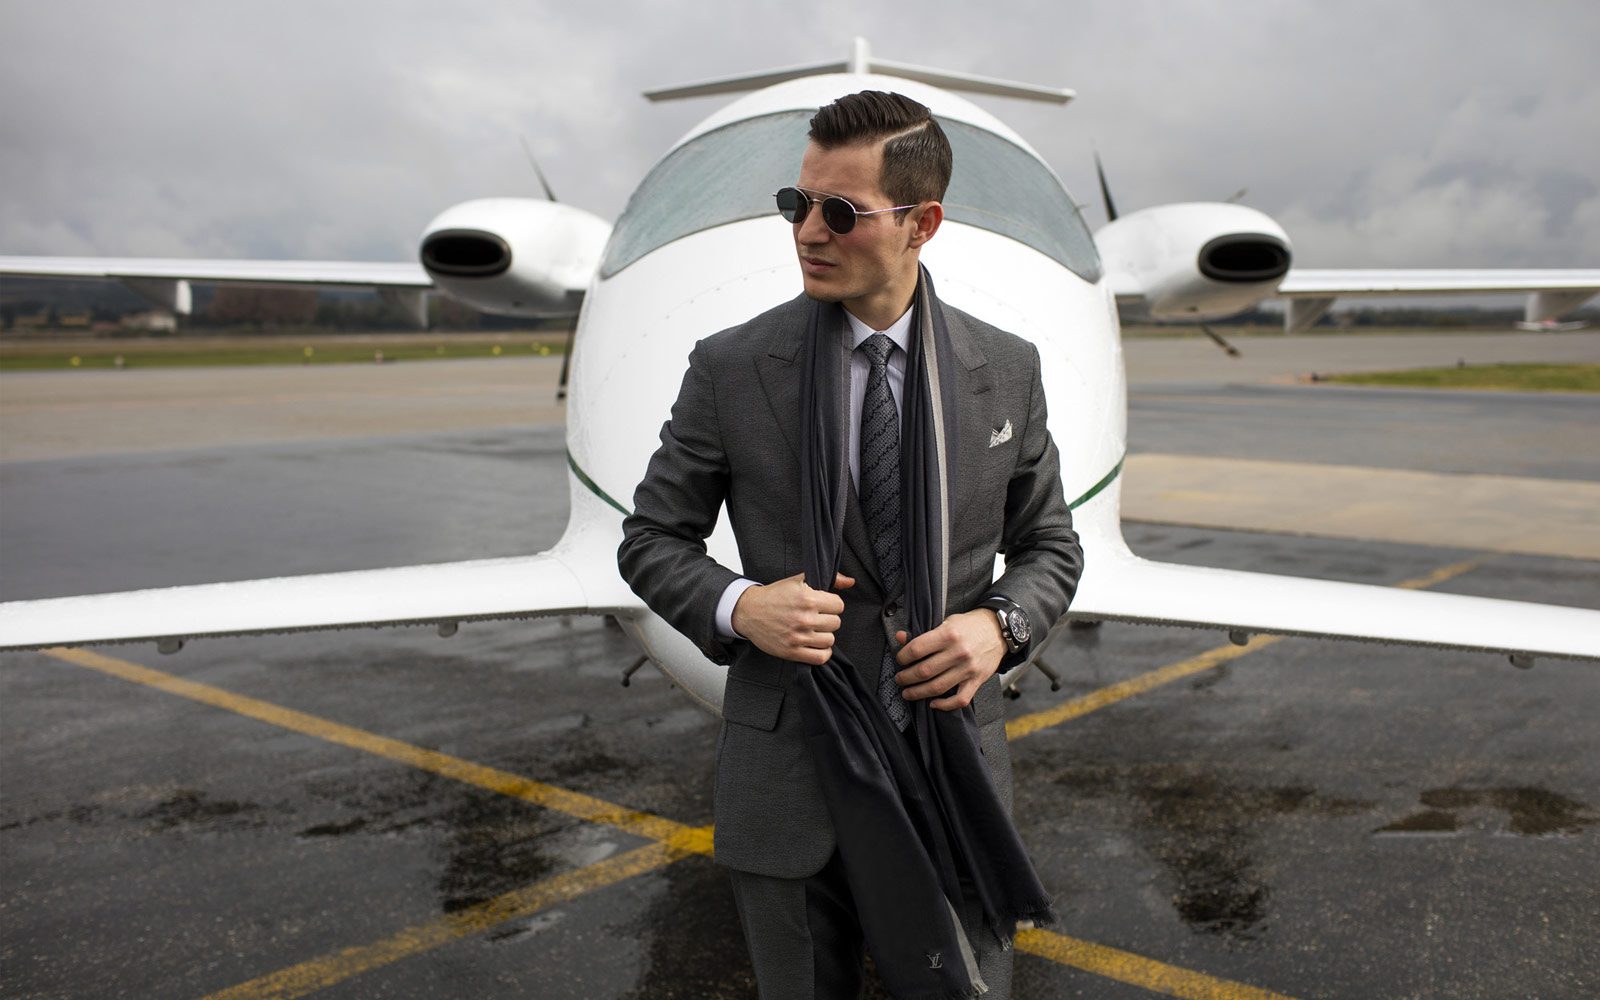 Man wearing suit standing in front of private plane